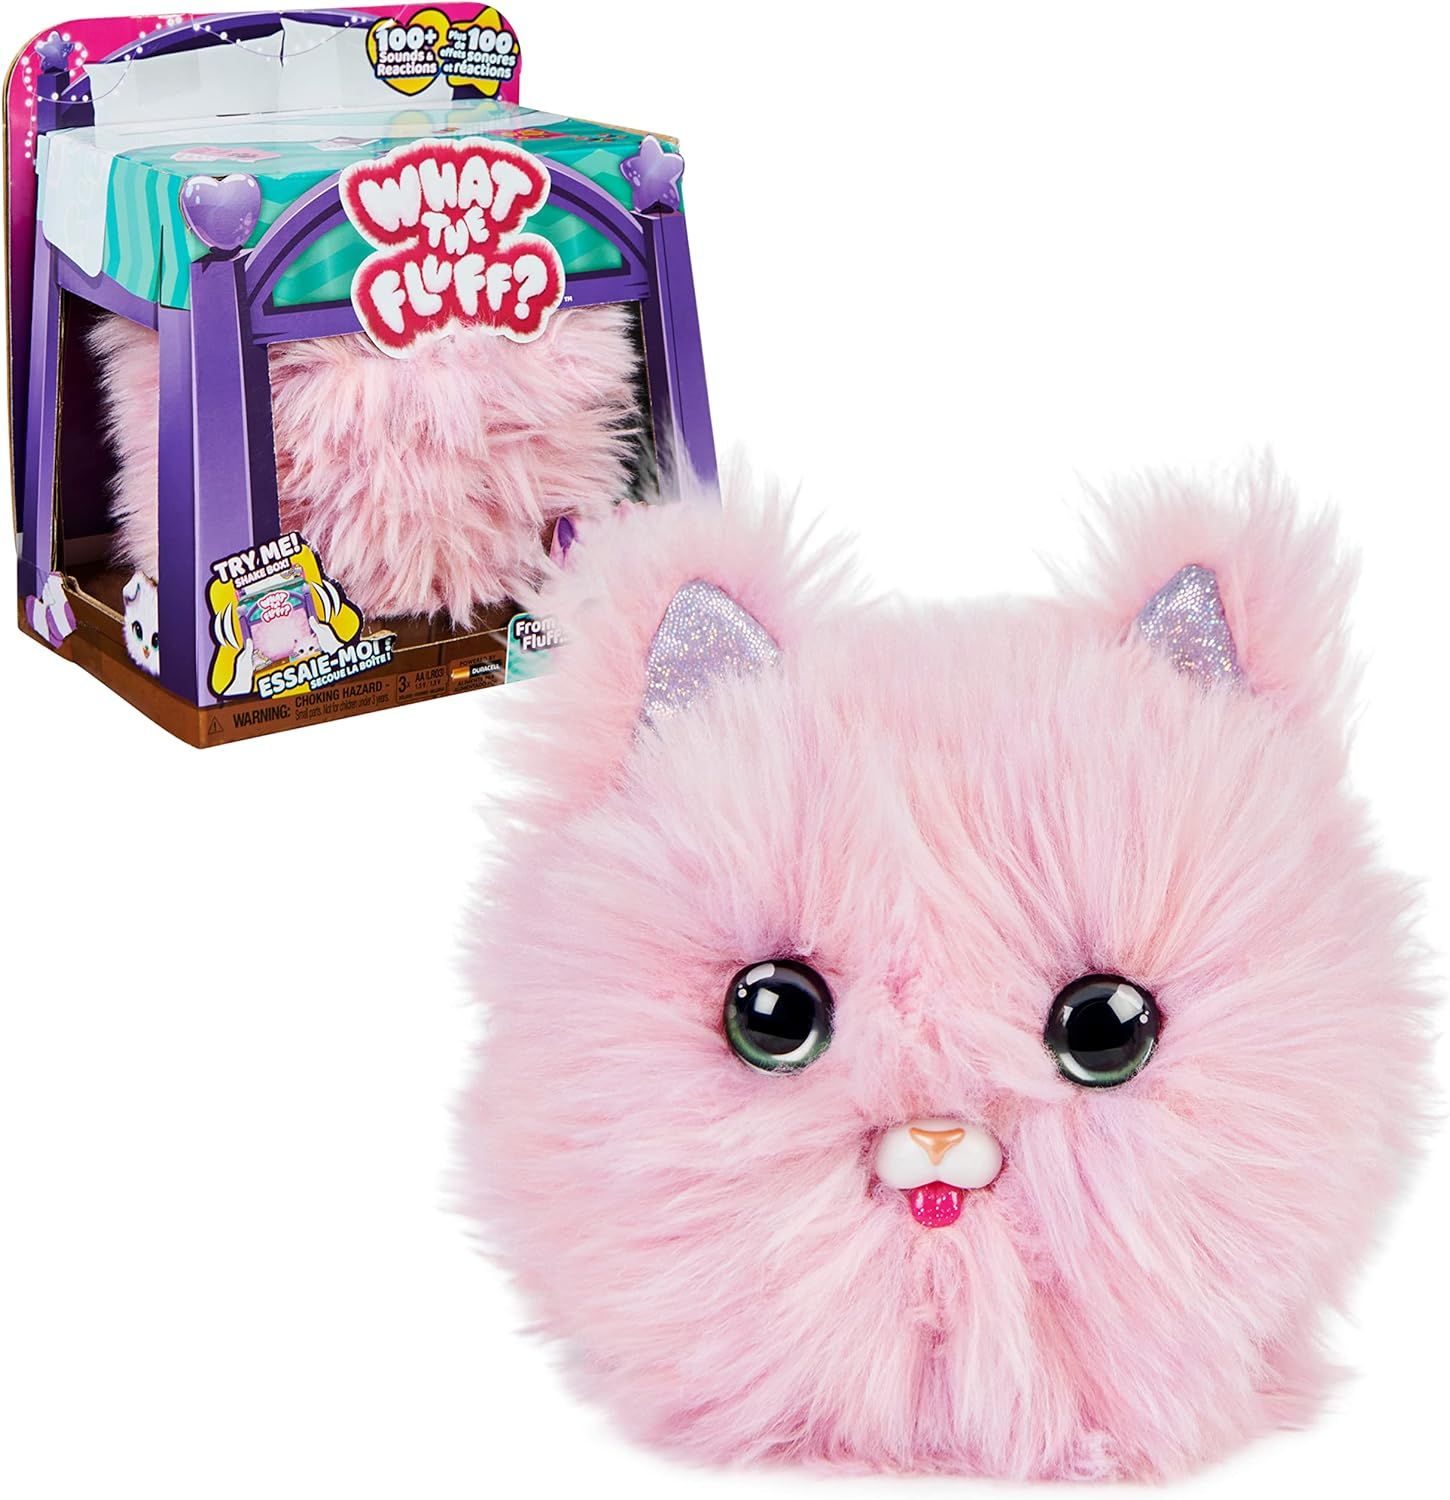 Purr ‘n Fluff, Surprise Reveal Interactive Toy Pet with Over 100 Sounds and Reactions, Kids Toy... | Amazon (US)